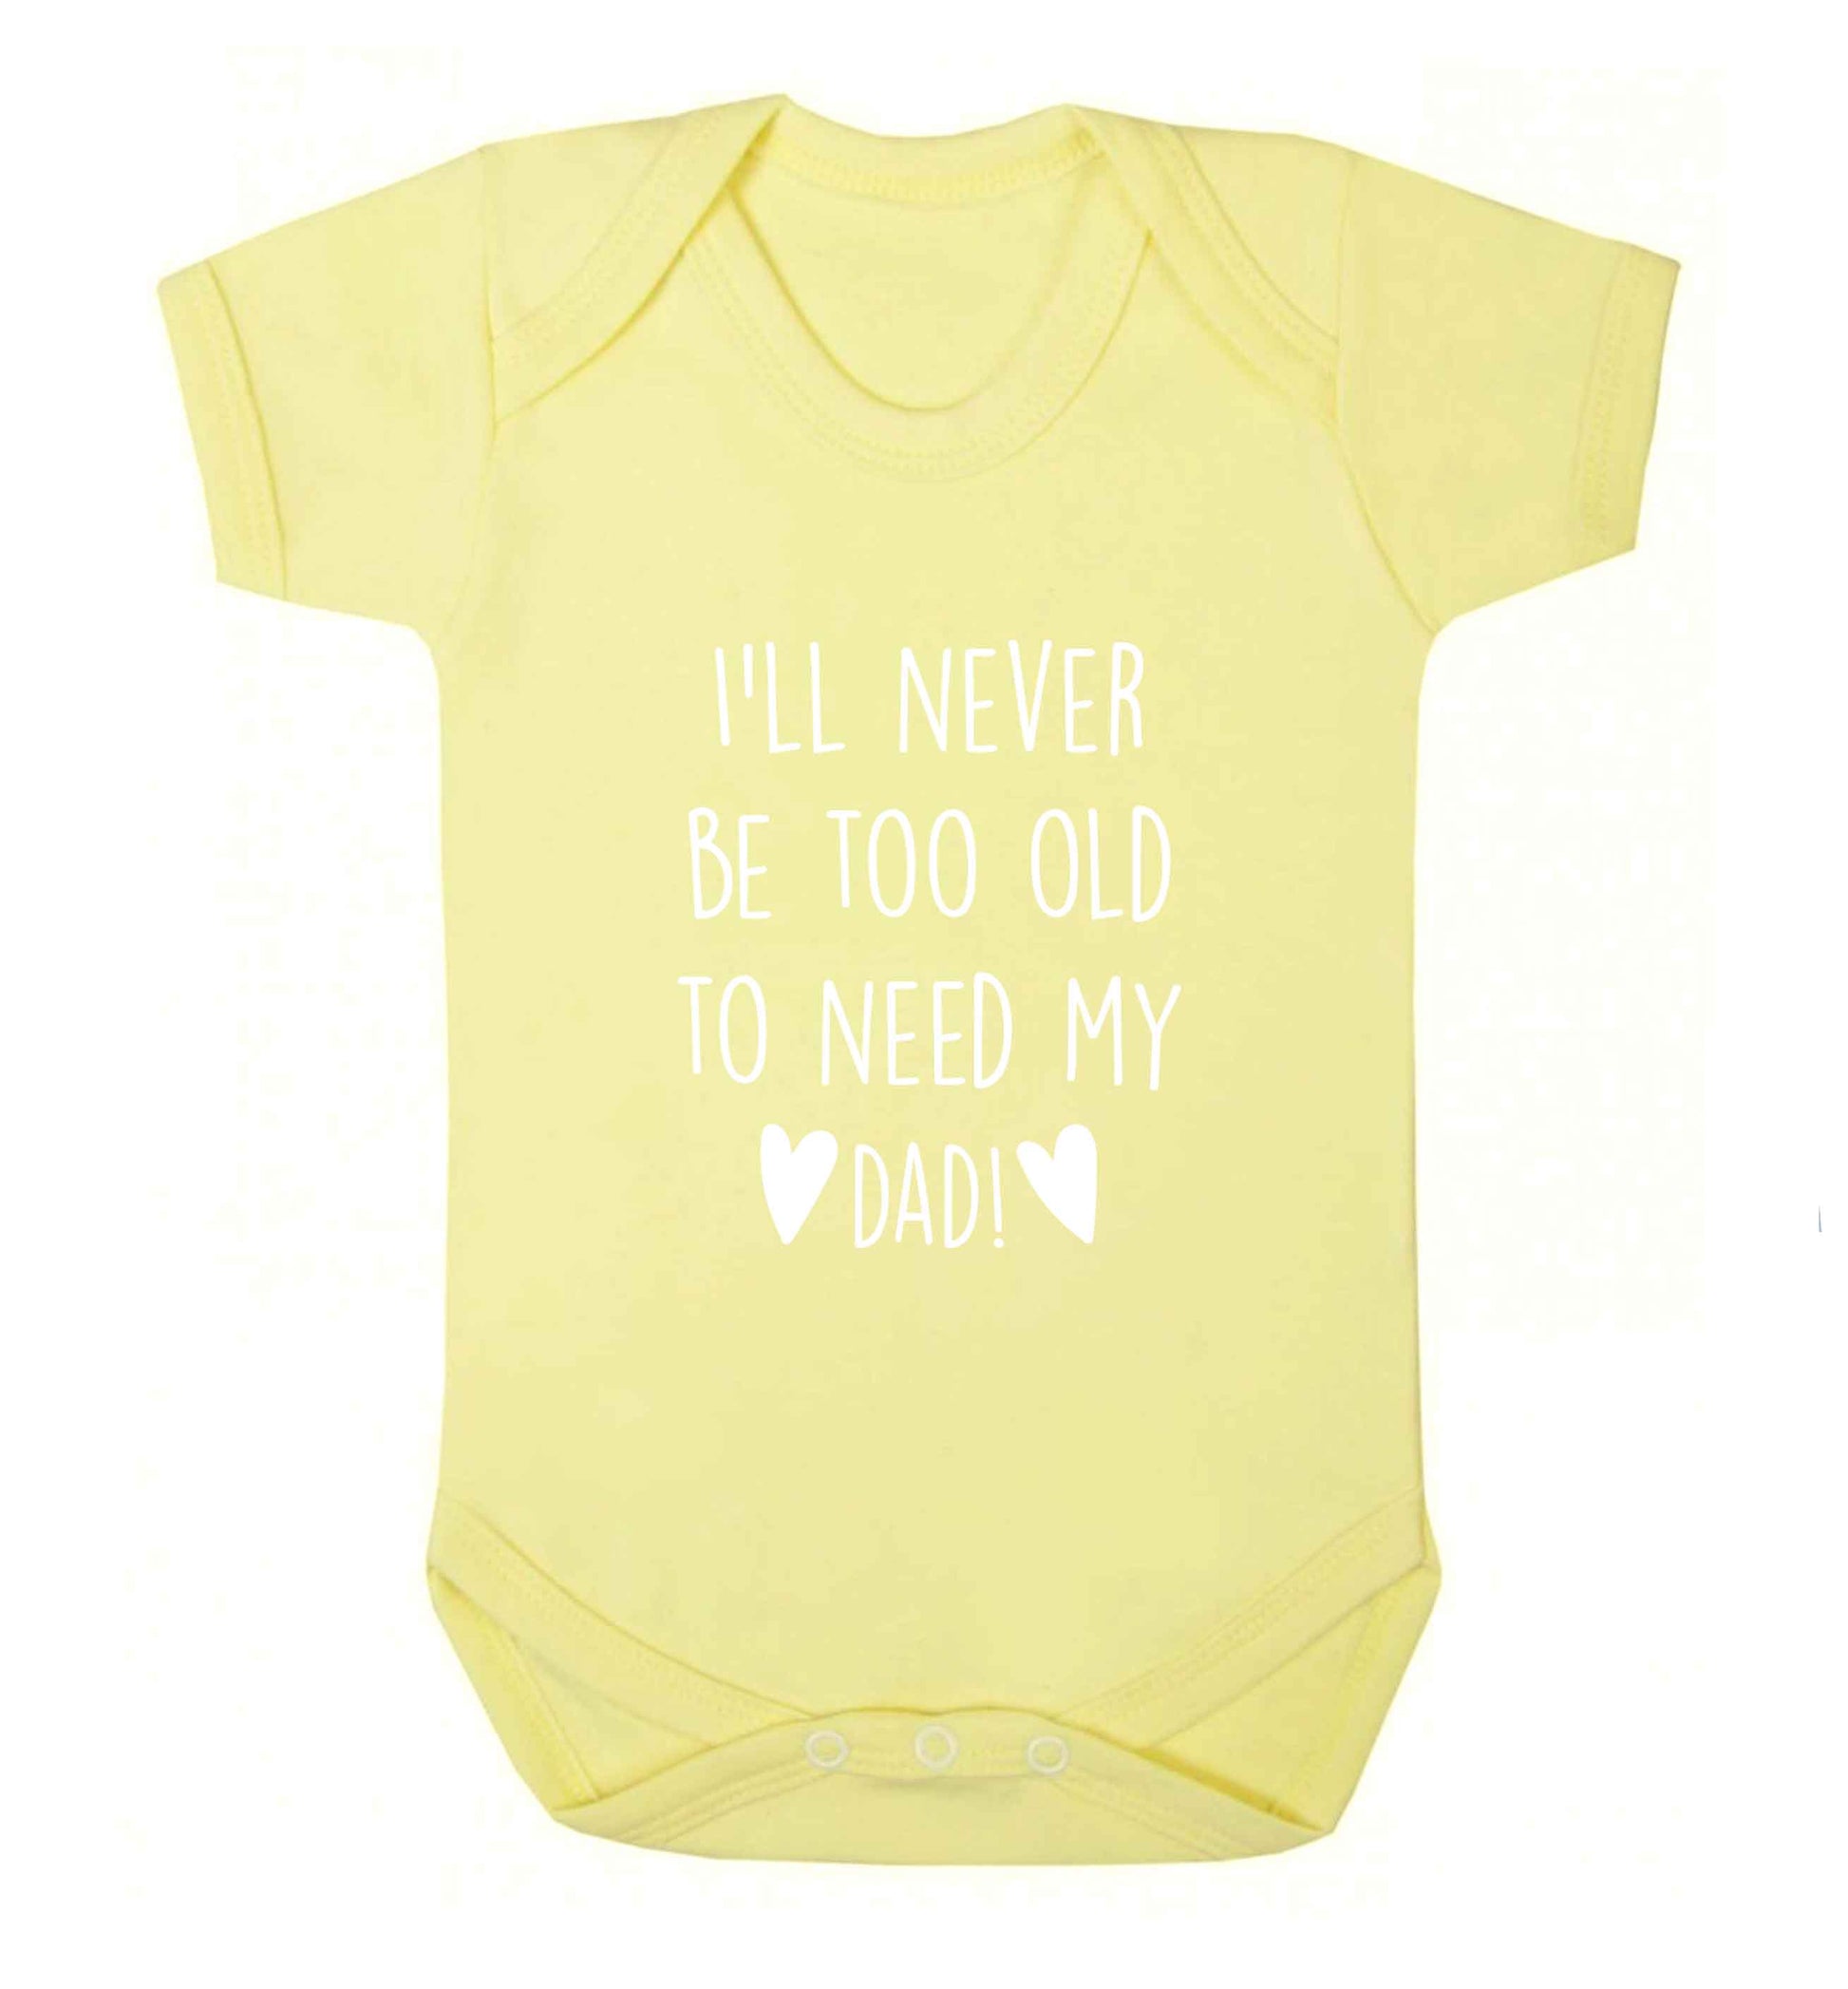 I'll never be too old to need my dad baby vest pale yellow 18-24 months